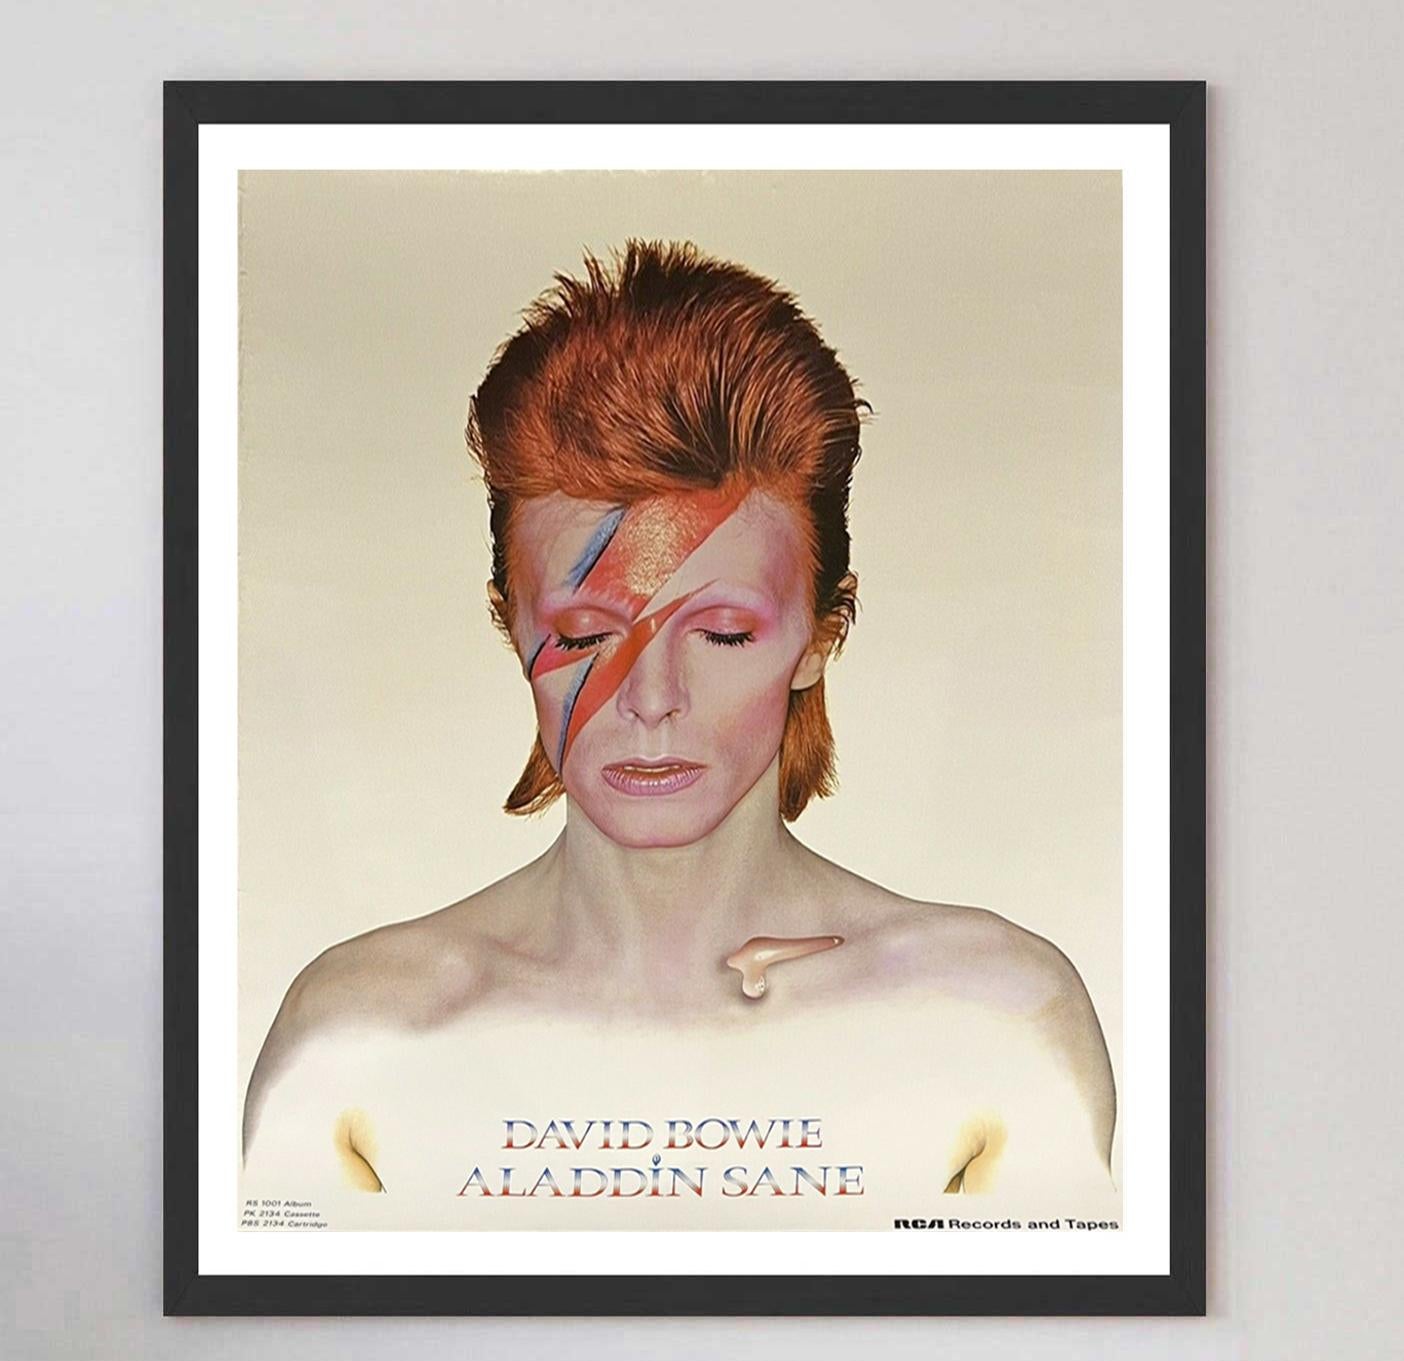 One of the most iconic & recognisable album artworks of all-time, this beautiful poster for David Bowie's sixth album 